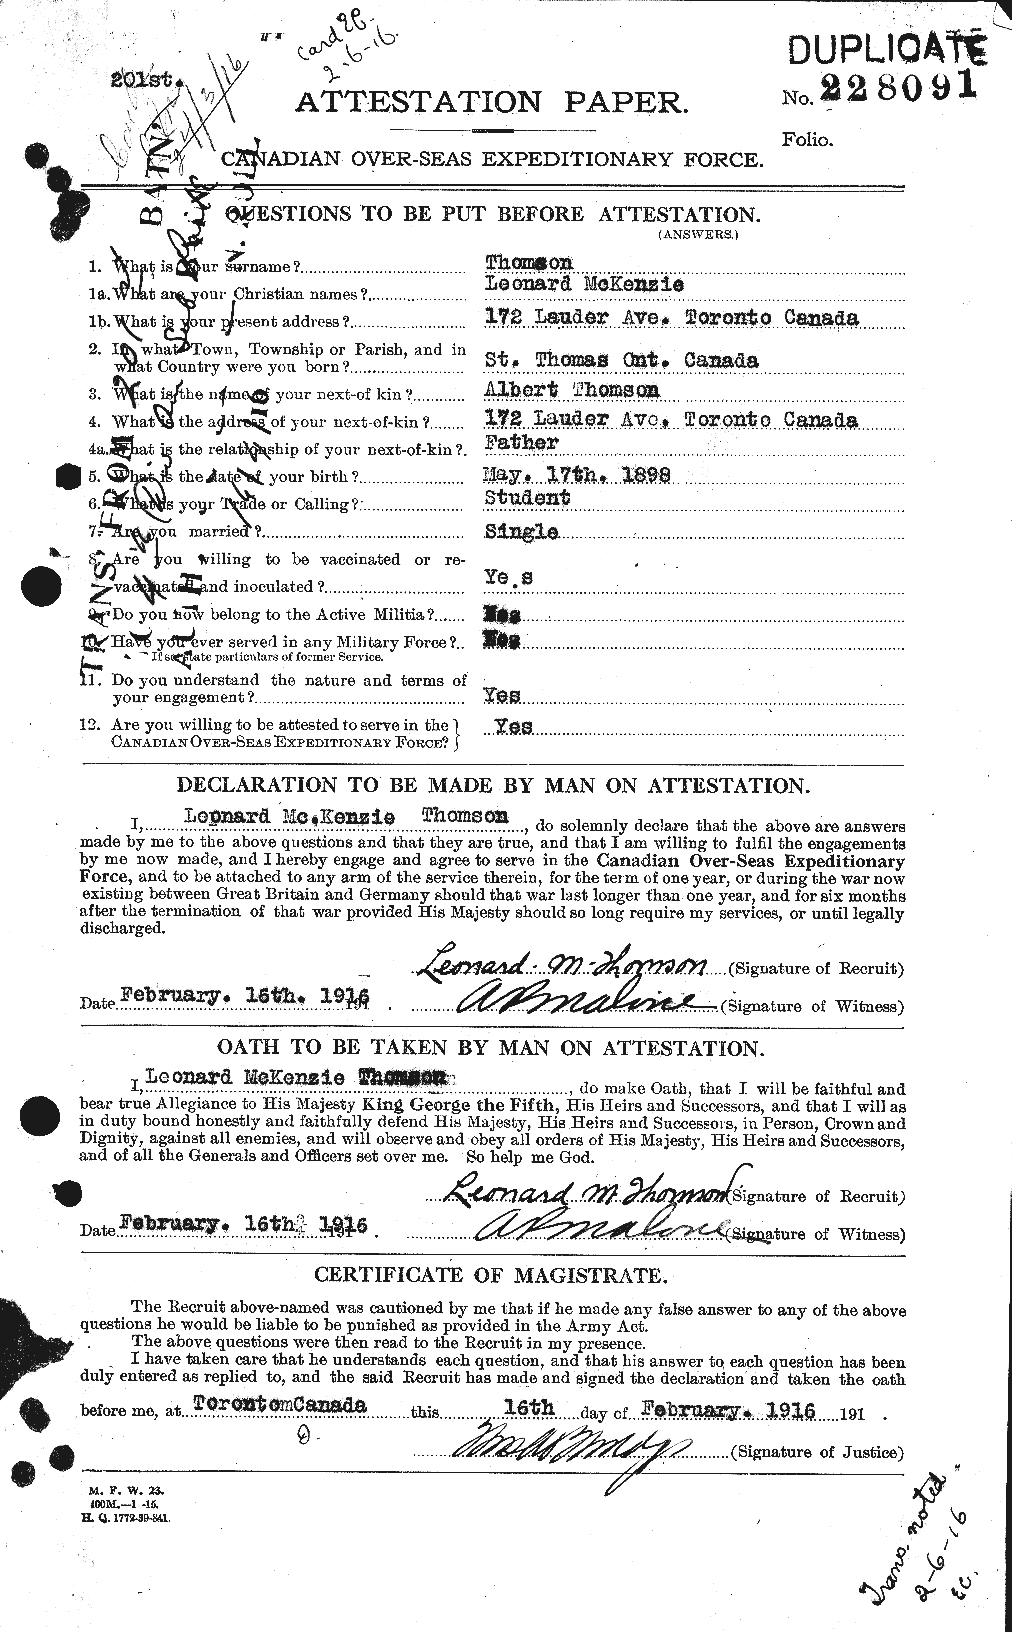 Personnel Records of the First World War - CEF 633441a